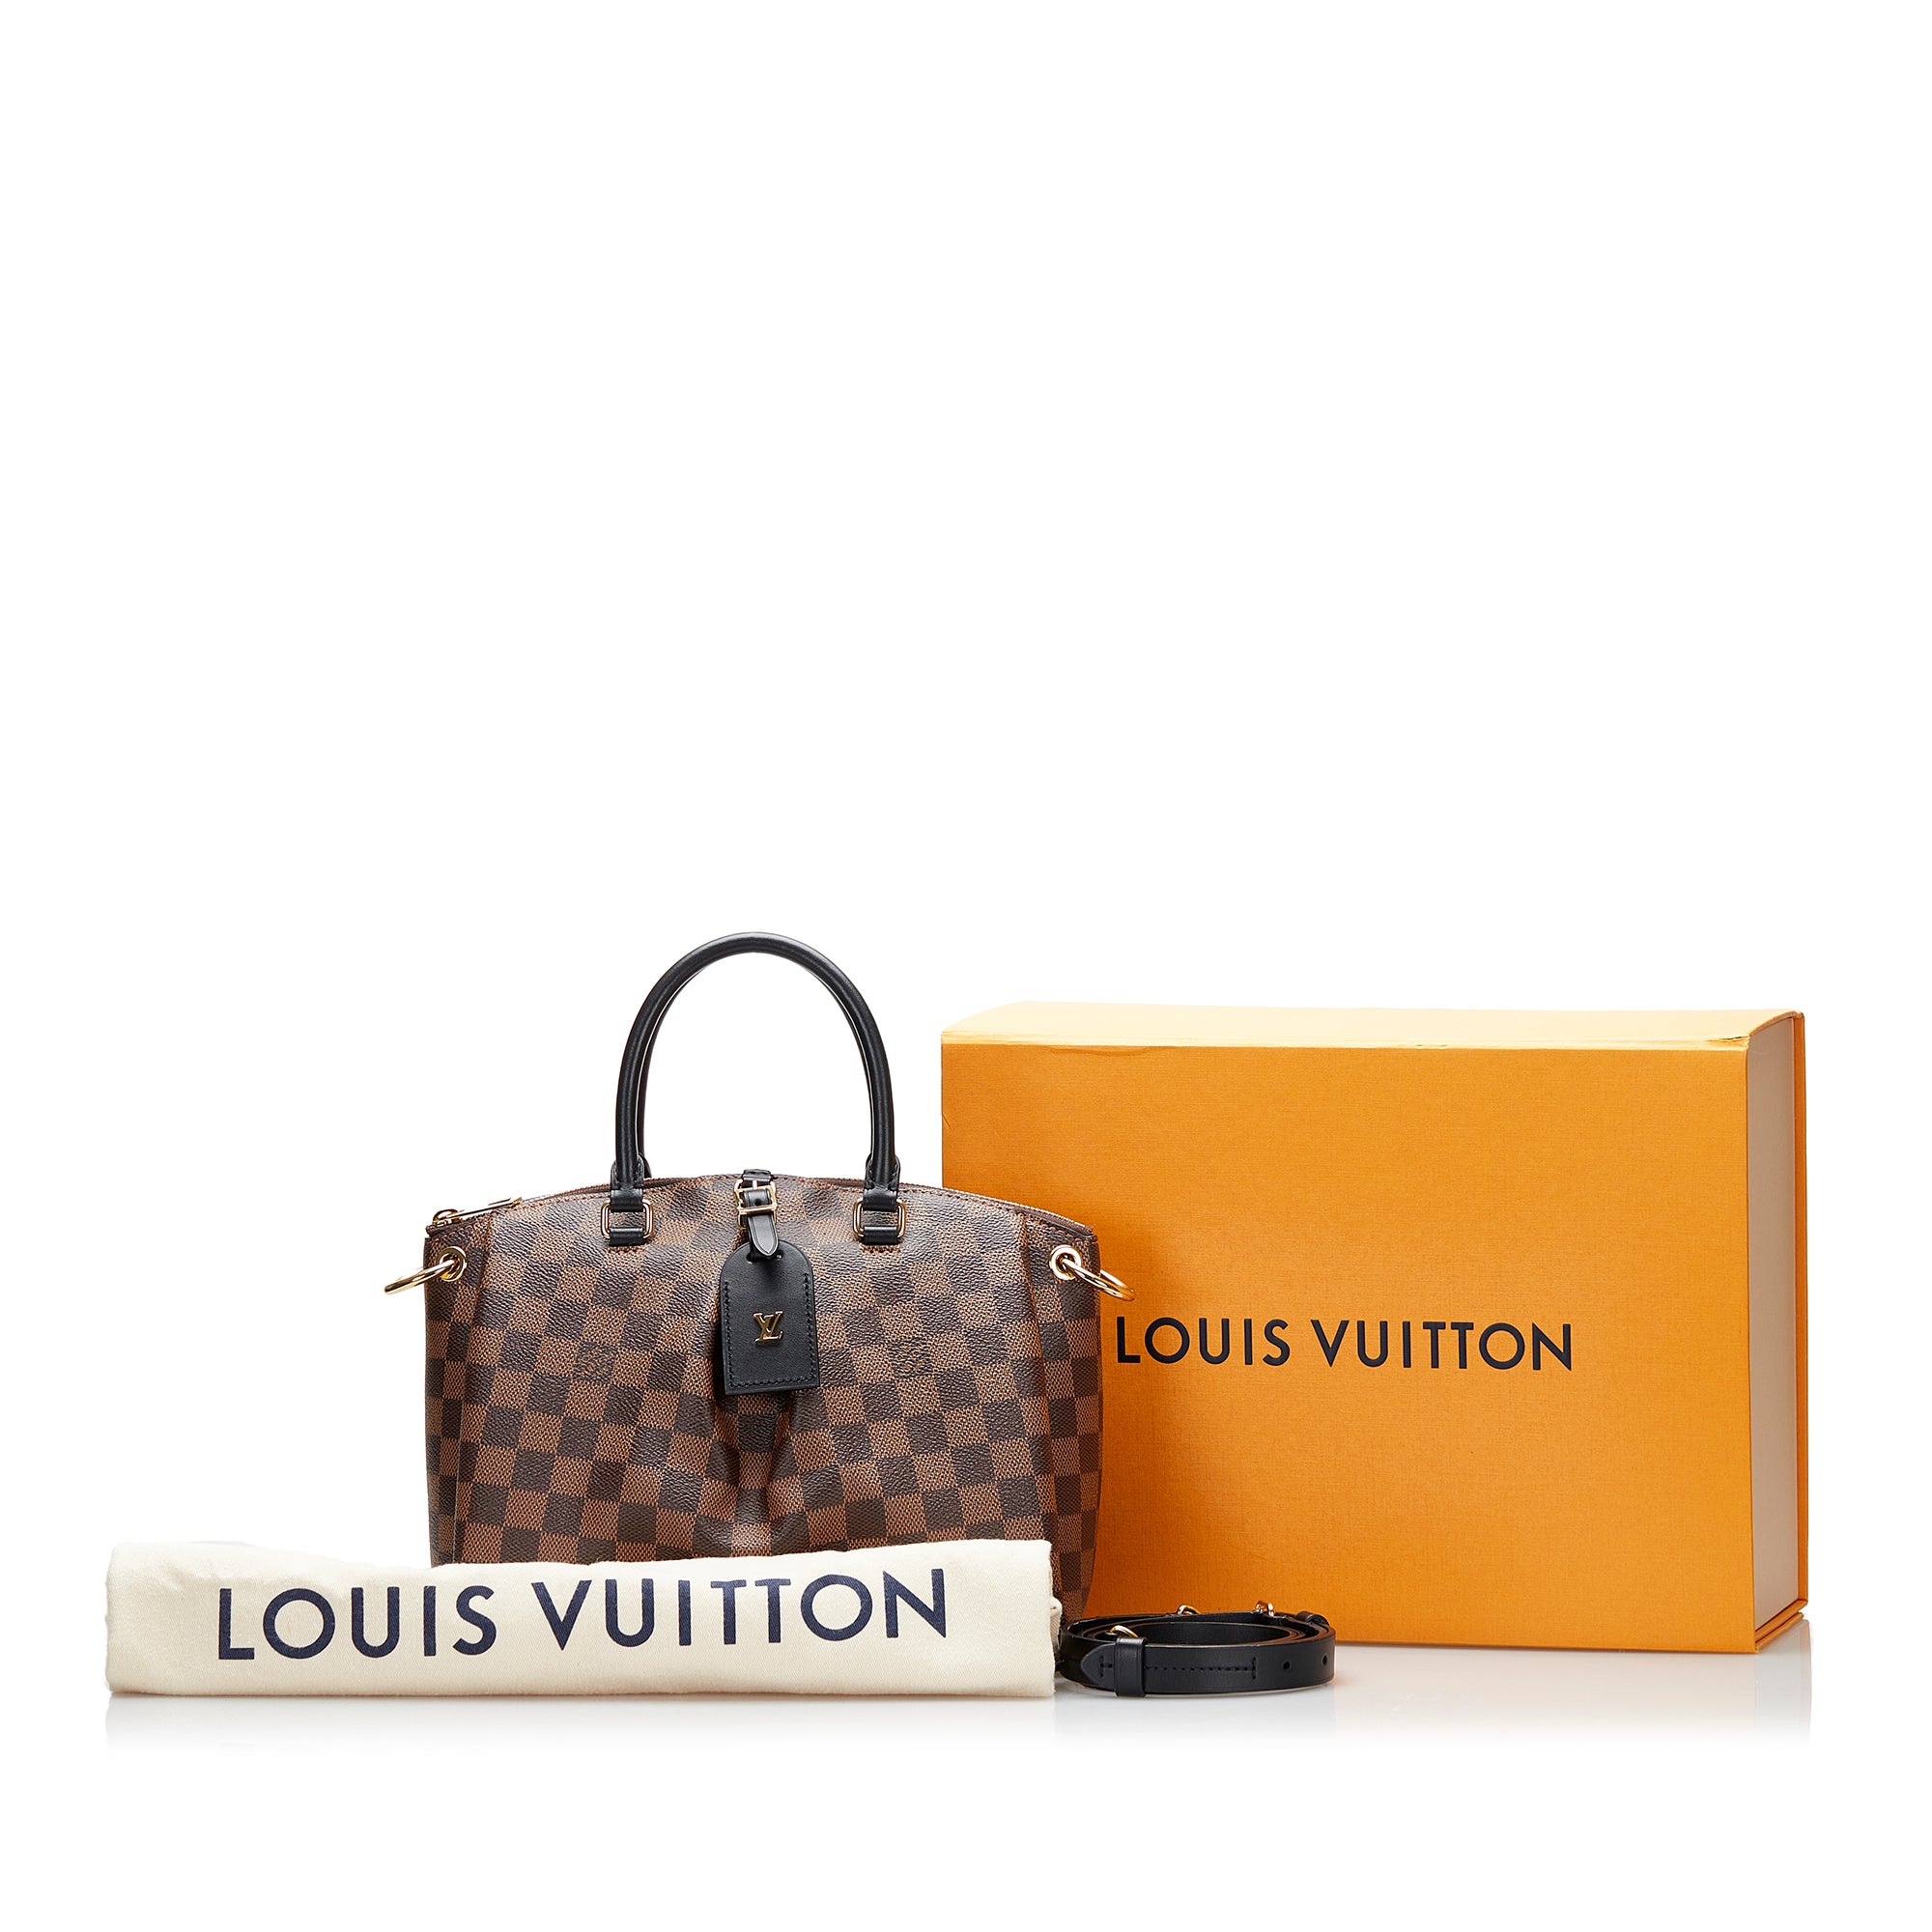 Boutique on Instagram: Louis vuitton With box and dust bag 20.5